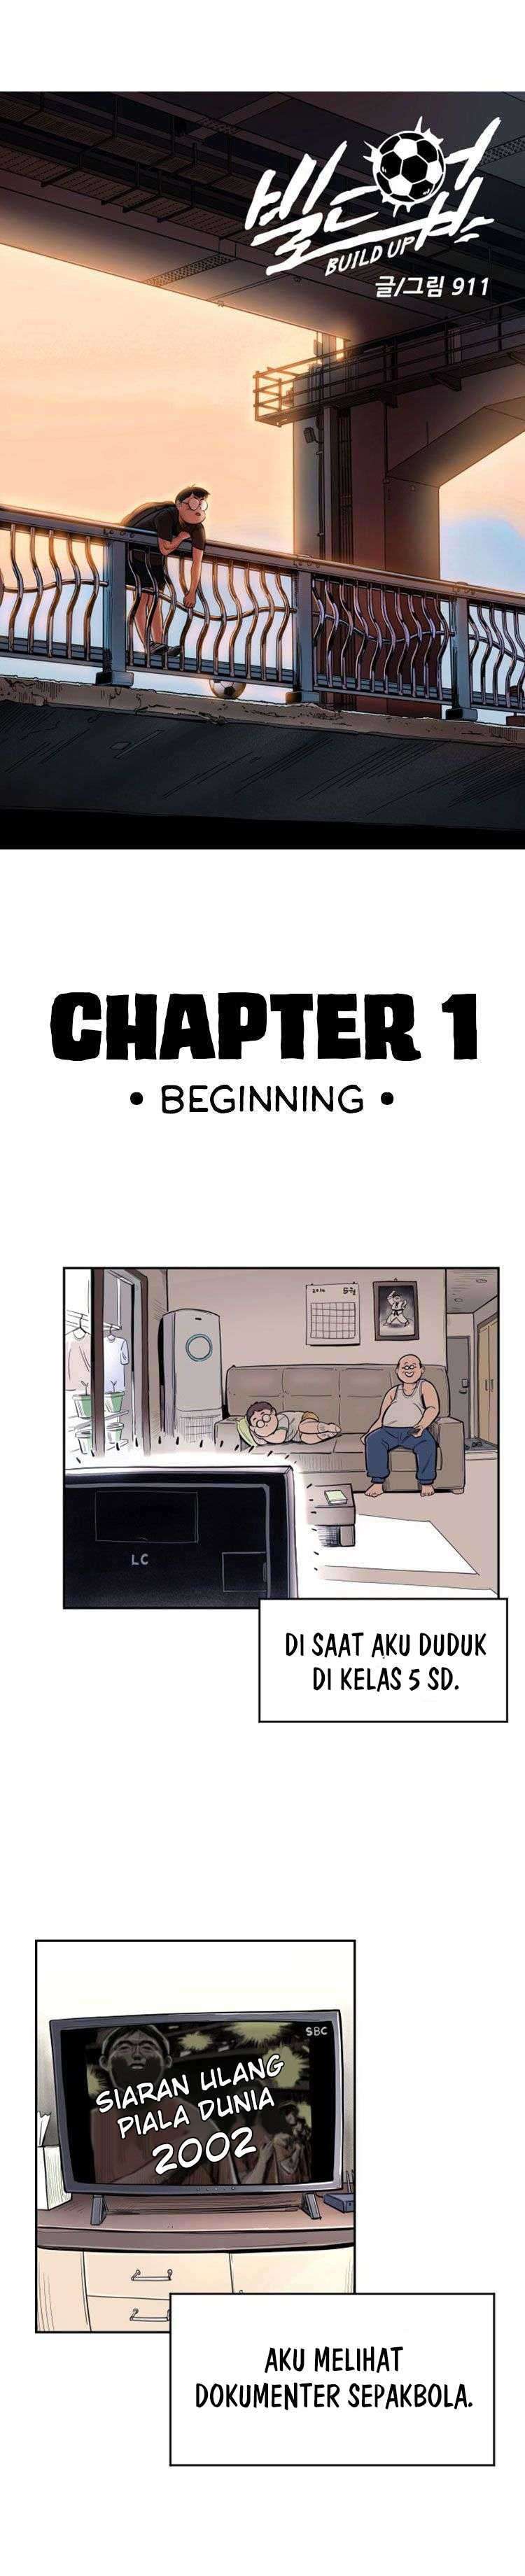 Build Up Chapter 1